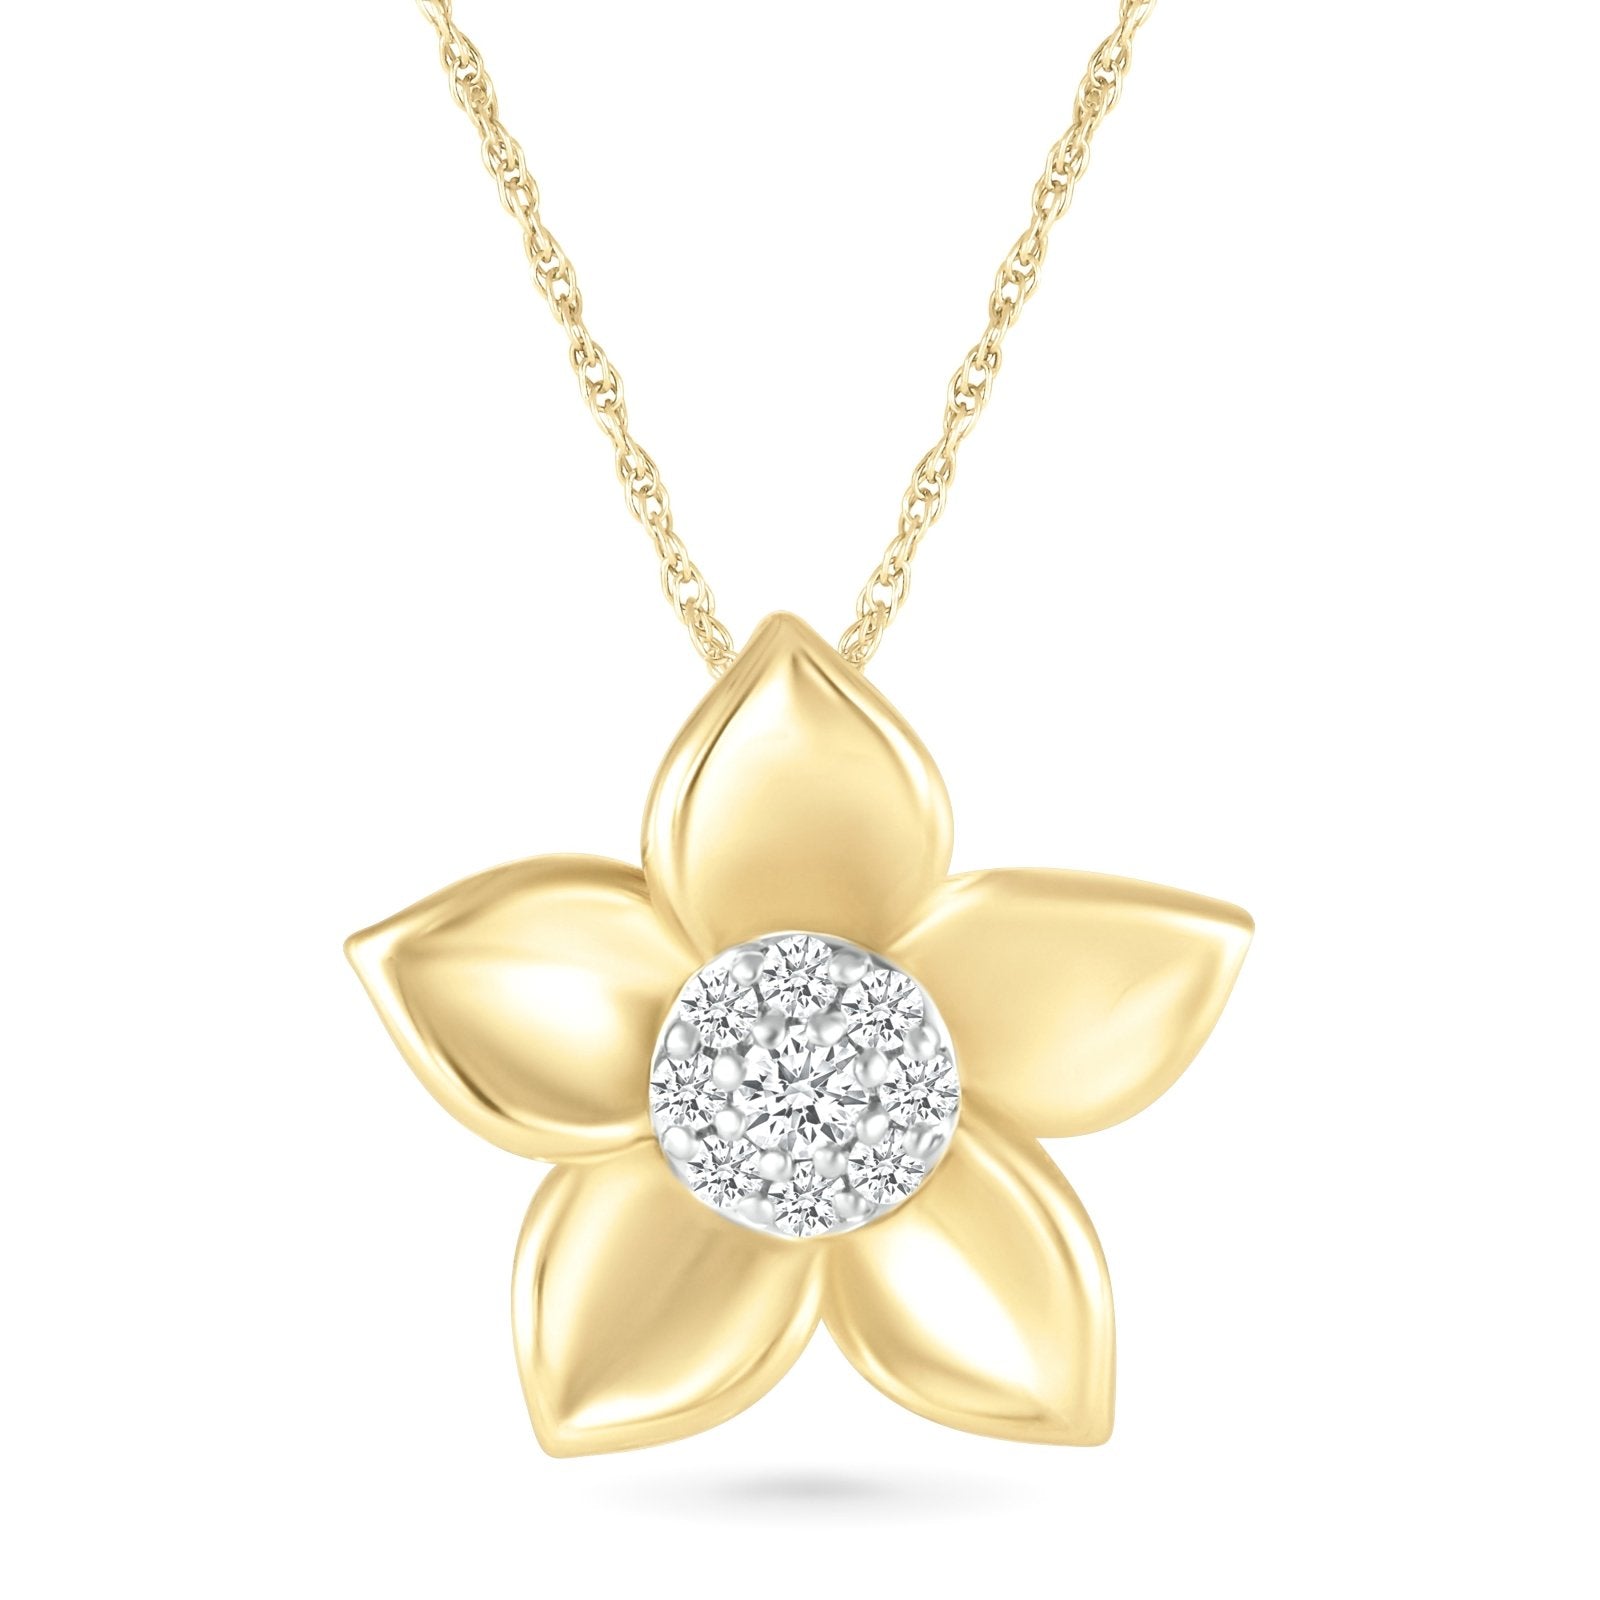 Diamond Pave Center Flower Pendant with Five Gold Petals Necklaces Estella Collection 32738 10k April Birthstone Colorless Gemstone #tag4# #tag5# #tag6# #tag7# #tag8# #tag9# #tag10#